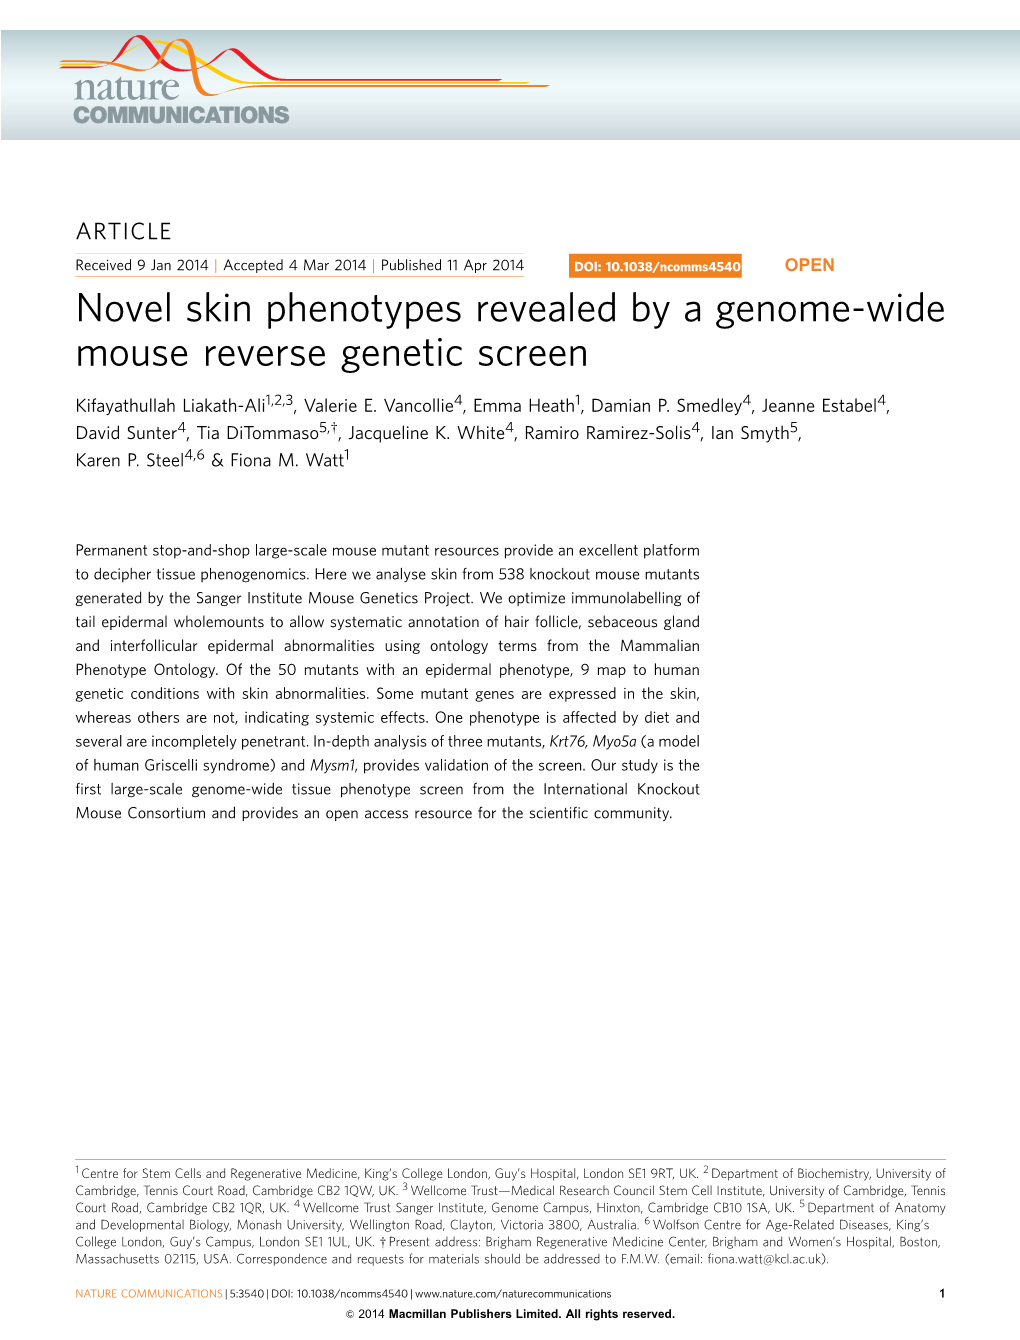 Novel Skin Phenotypes Revealed by a Genome-Wide Mouse Reverse Genetic Screen